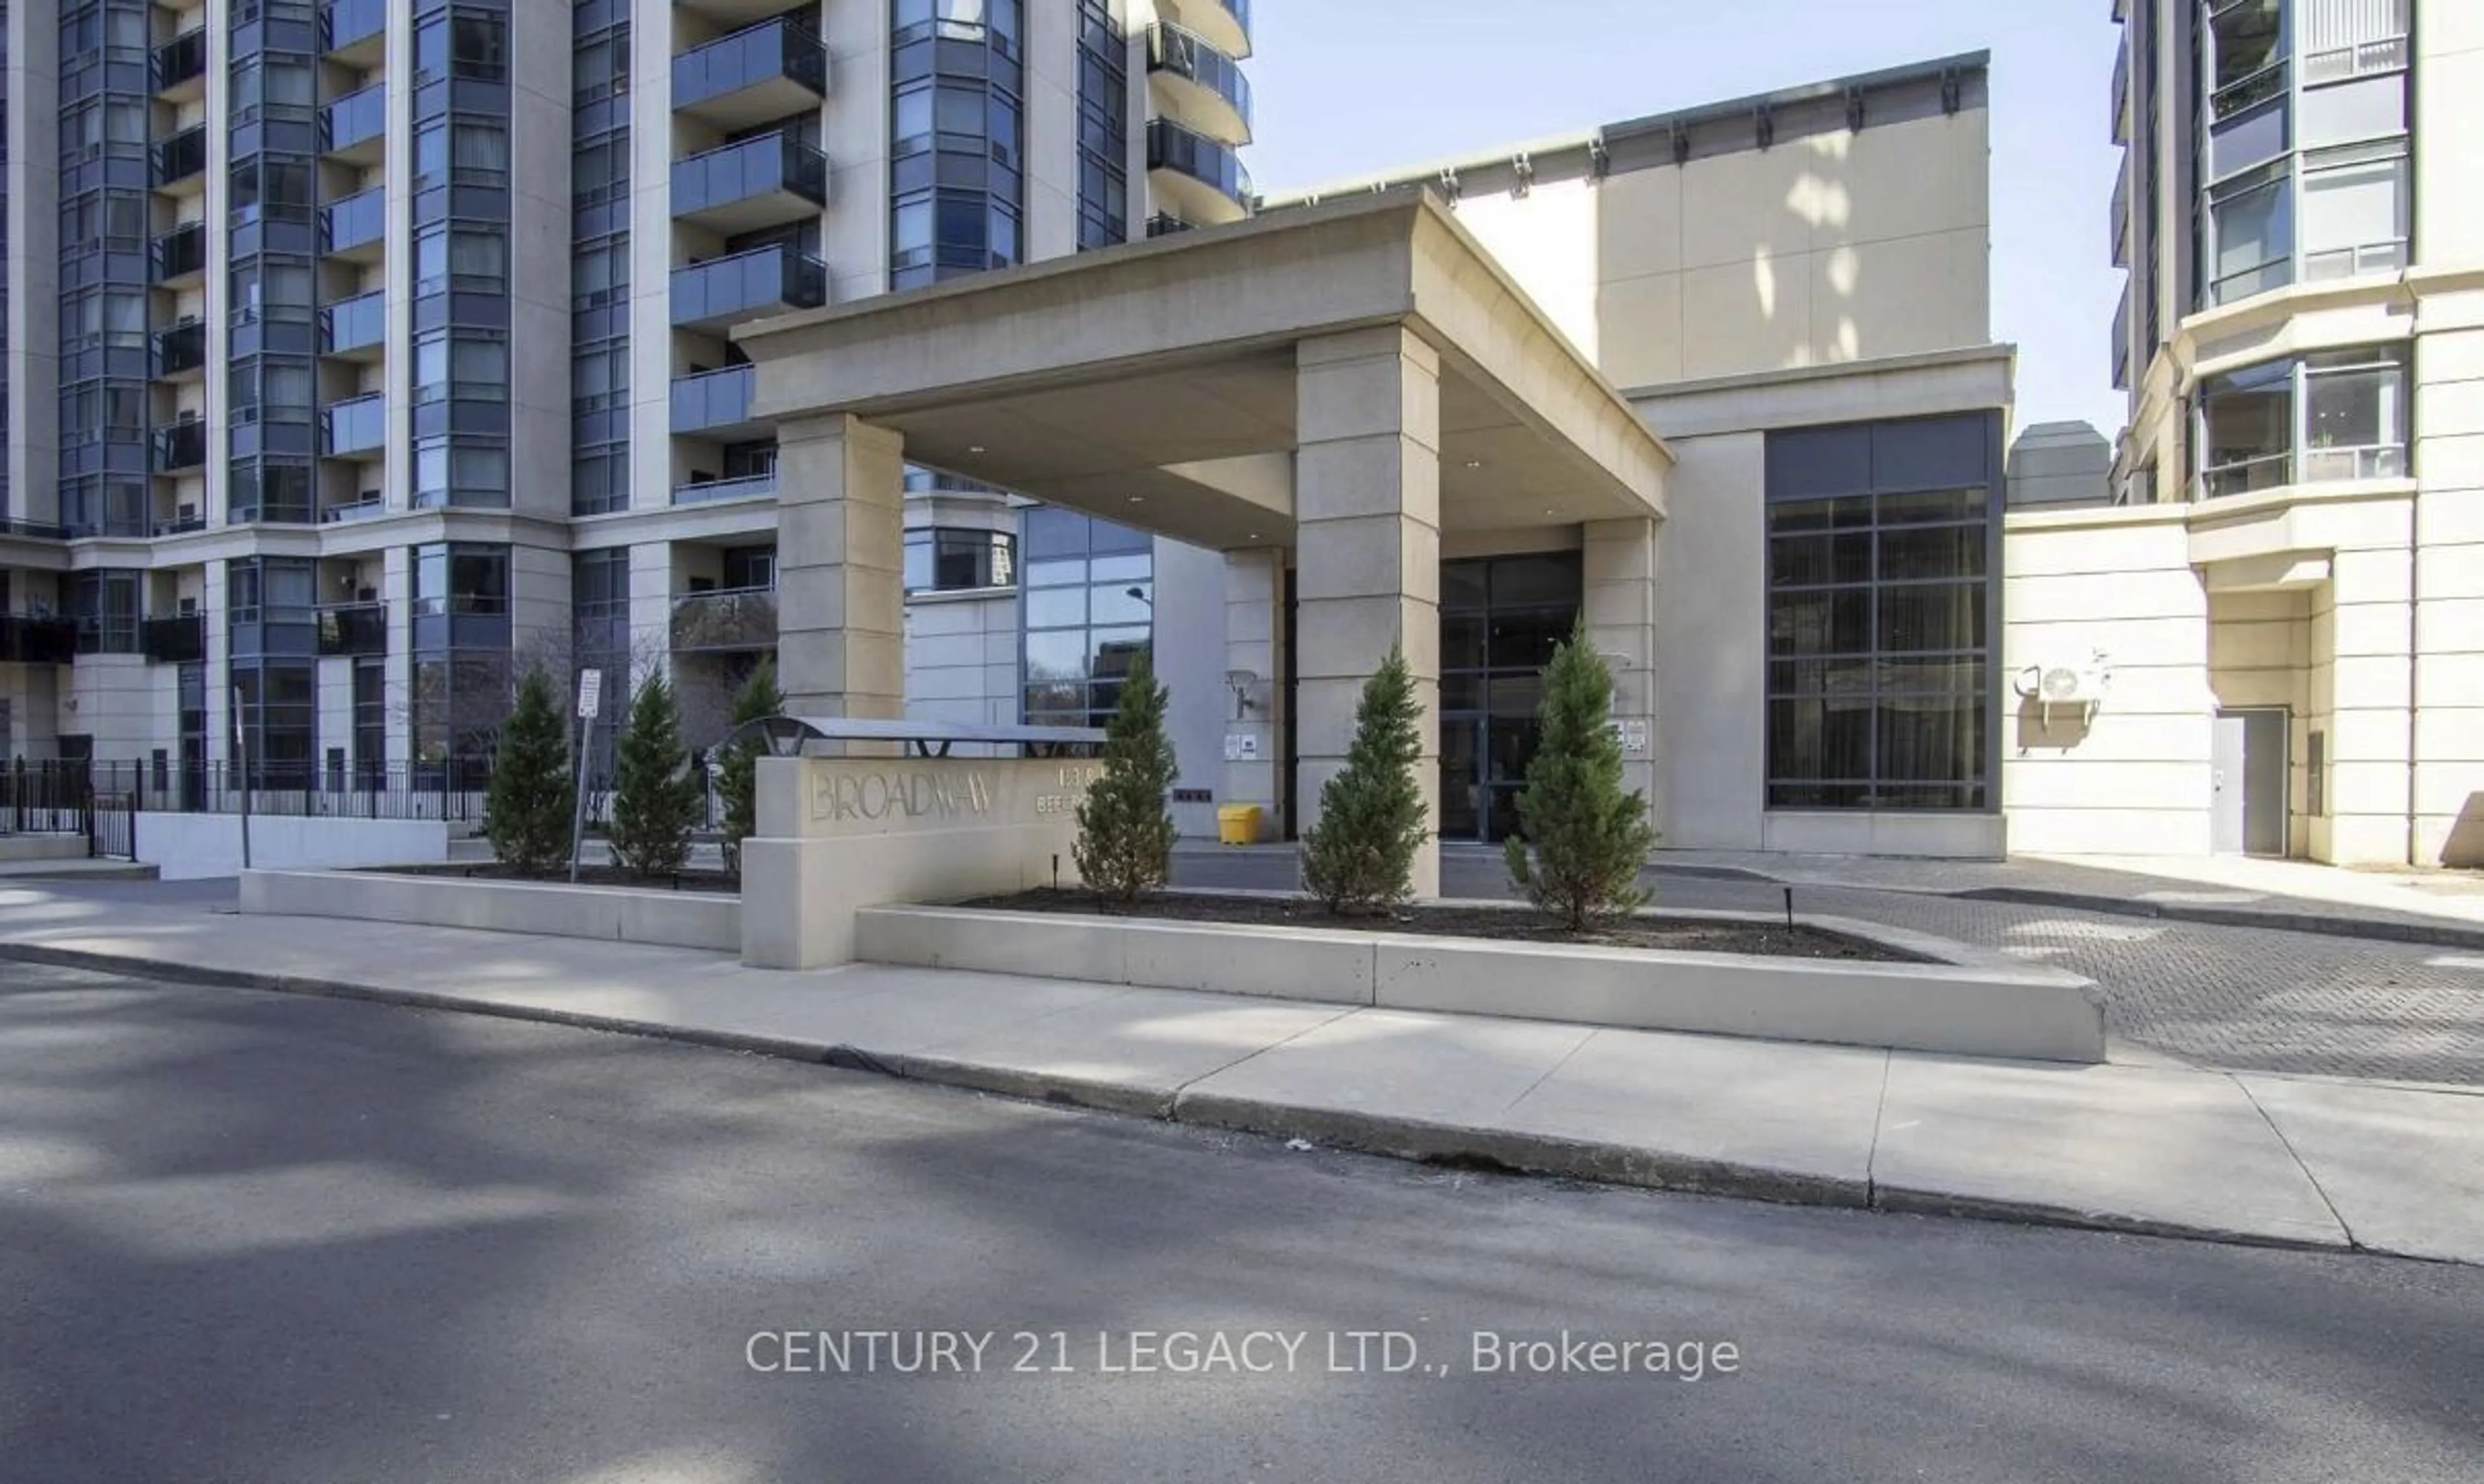 A pic from exterior of the house or condo for 155 Beecroft Rd #1702, Toronto Ontario M2N 7C6